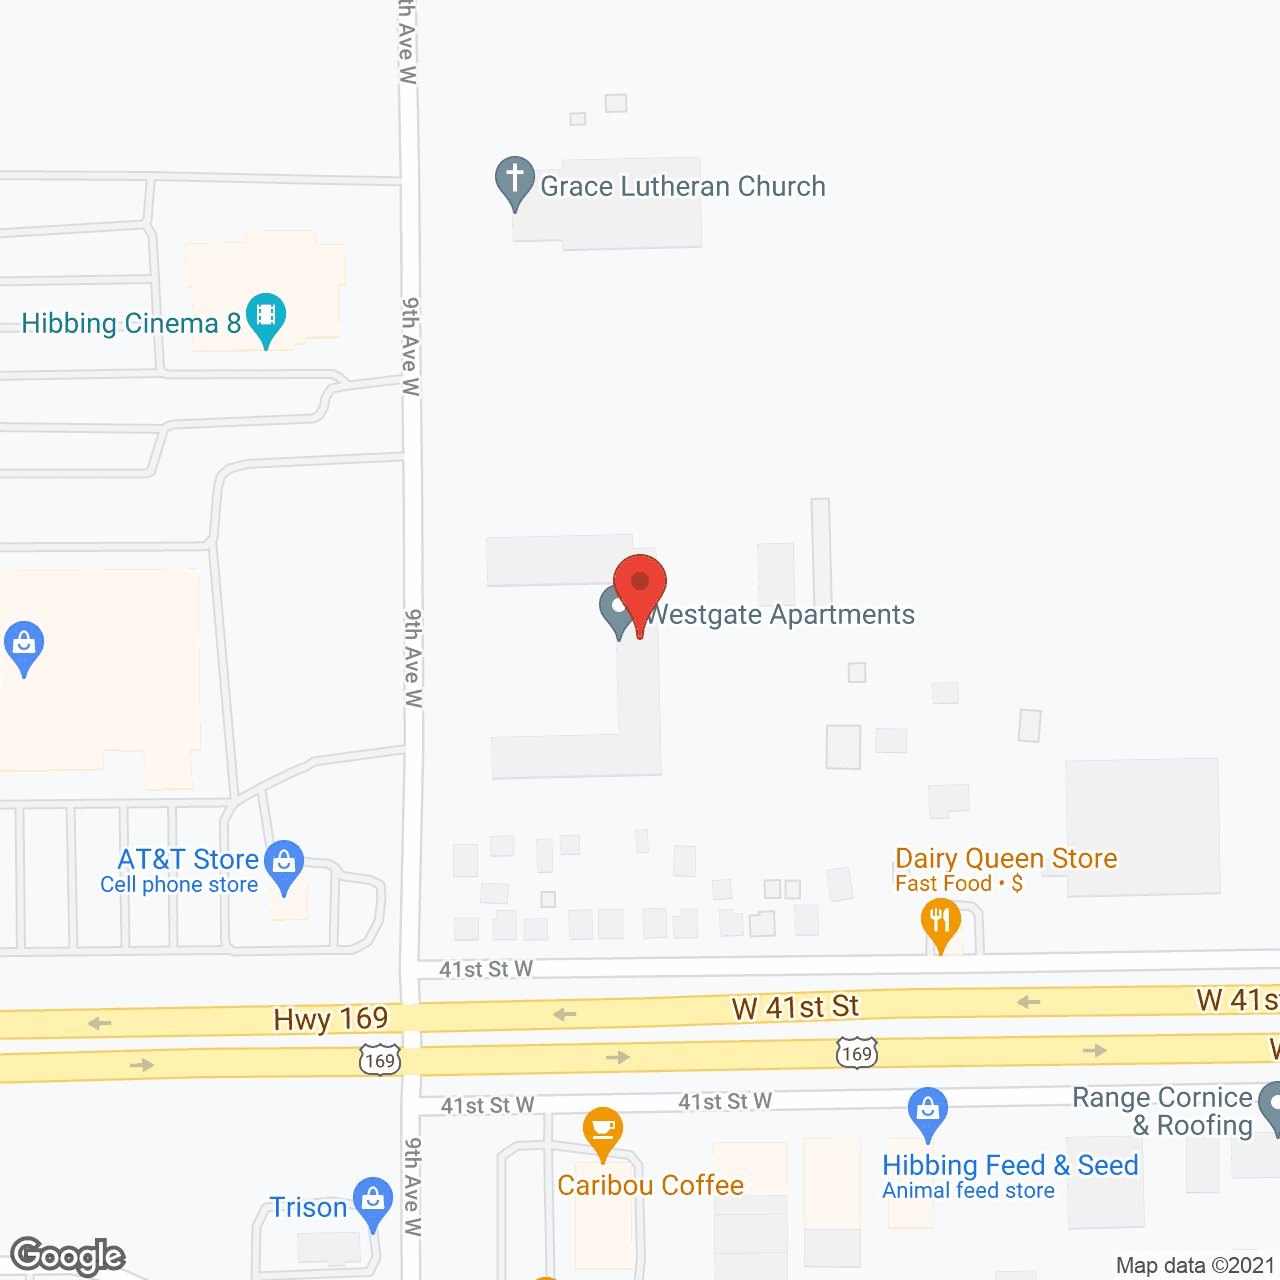 Westgate Apartments in google map